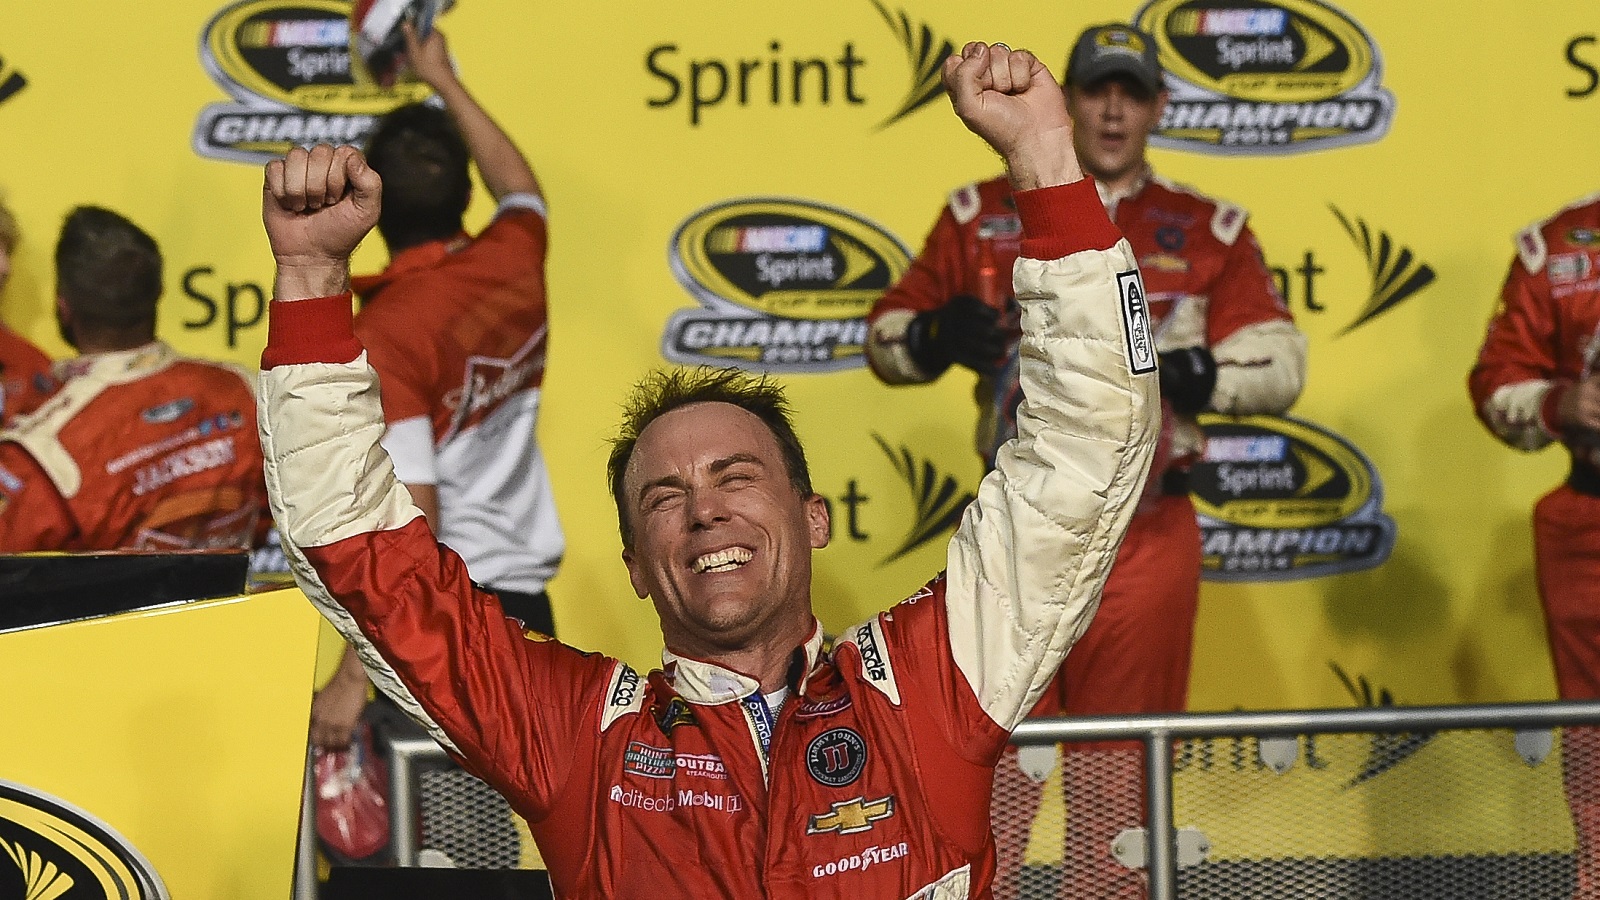 Kevin Harvick celebrates after winning during the NASCAR Sprint Cup Series Ford EcoBoost 400 at Homestead-Miami Speedway on Nov. 16, 2014. | Getty Images